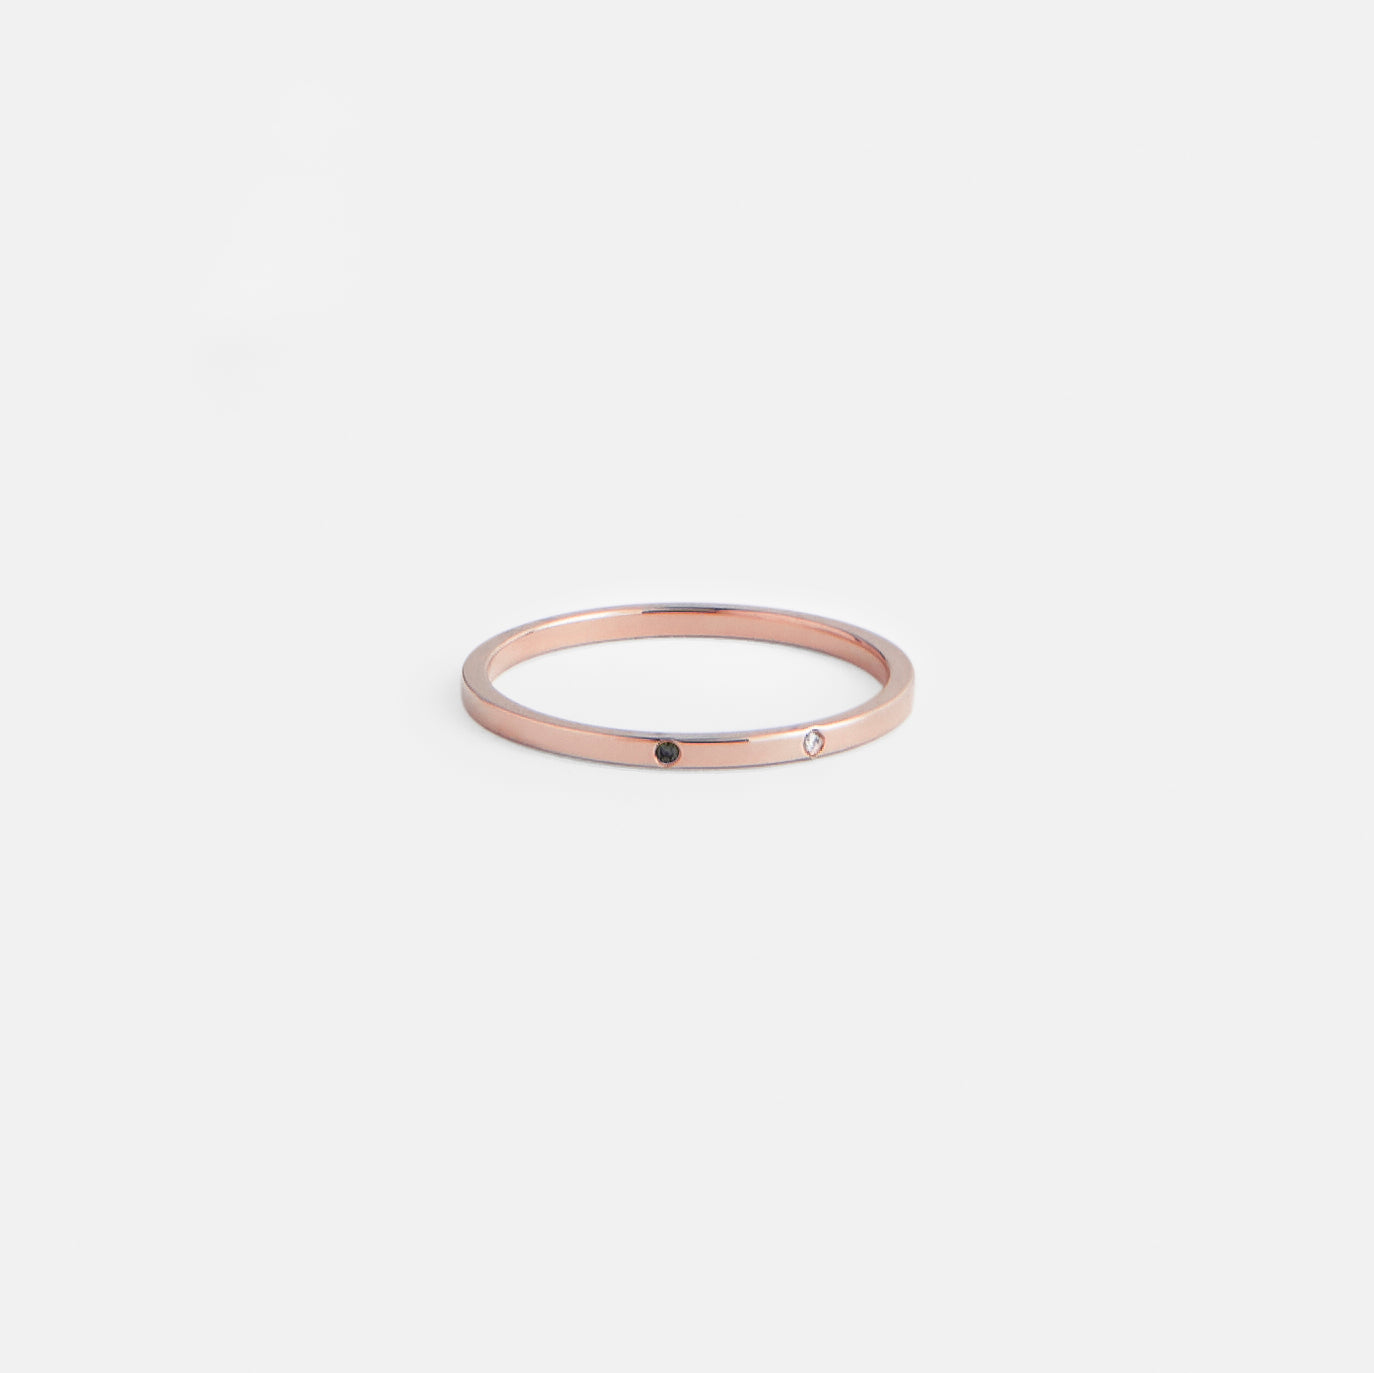 Sarala Thin Ring in 14k Rose Gold set with White and Black Diamonds By SHW Fine Jewelry NYC